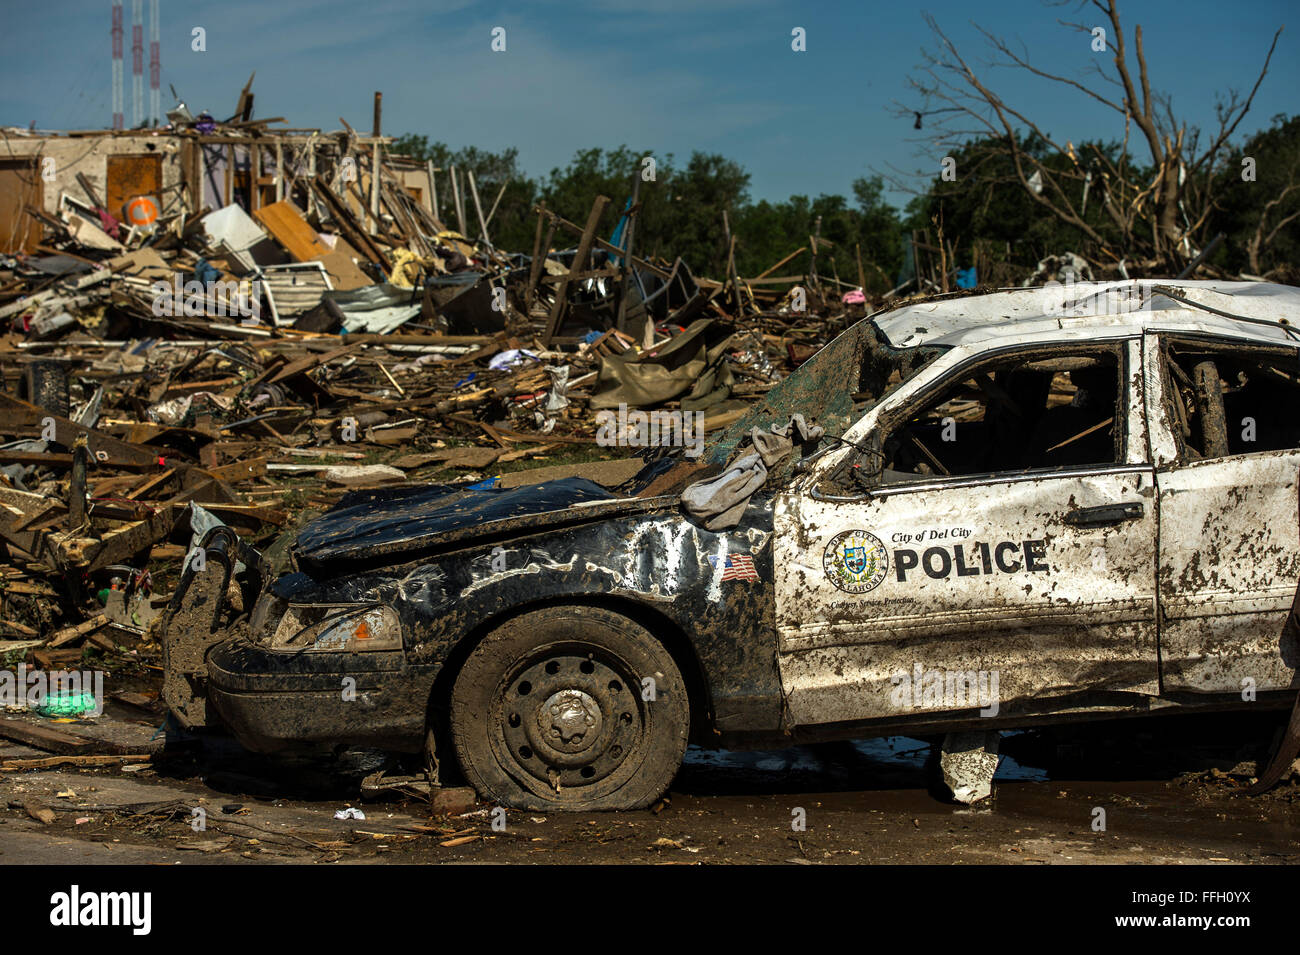 A police car was destroyed by a tornado May 22, 2013, in Moore, Okla. The EF-5 tornado, with winds reaching at least 200 mph, traveled for 20 miles, leaving a two-mile-wide path of destruction, leveling homes, crushing vehicles, and killing more than 20 people. More than 115 Oklahoma National Guard have been activated to assist in the rescue and relief efforts. Stock Photo